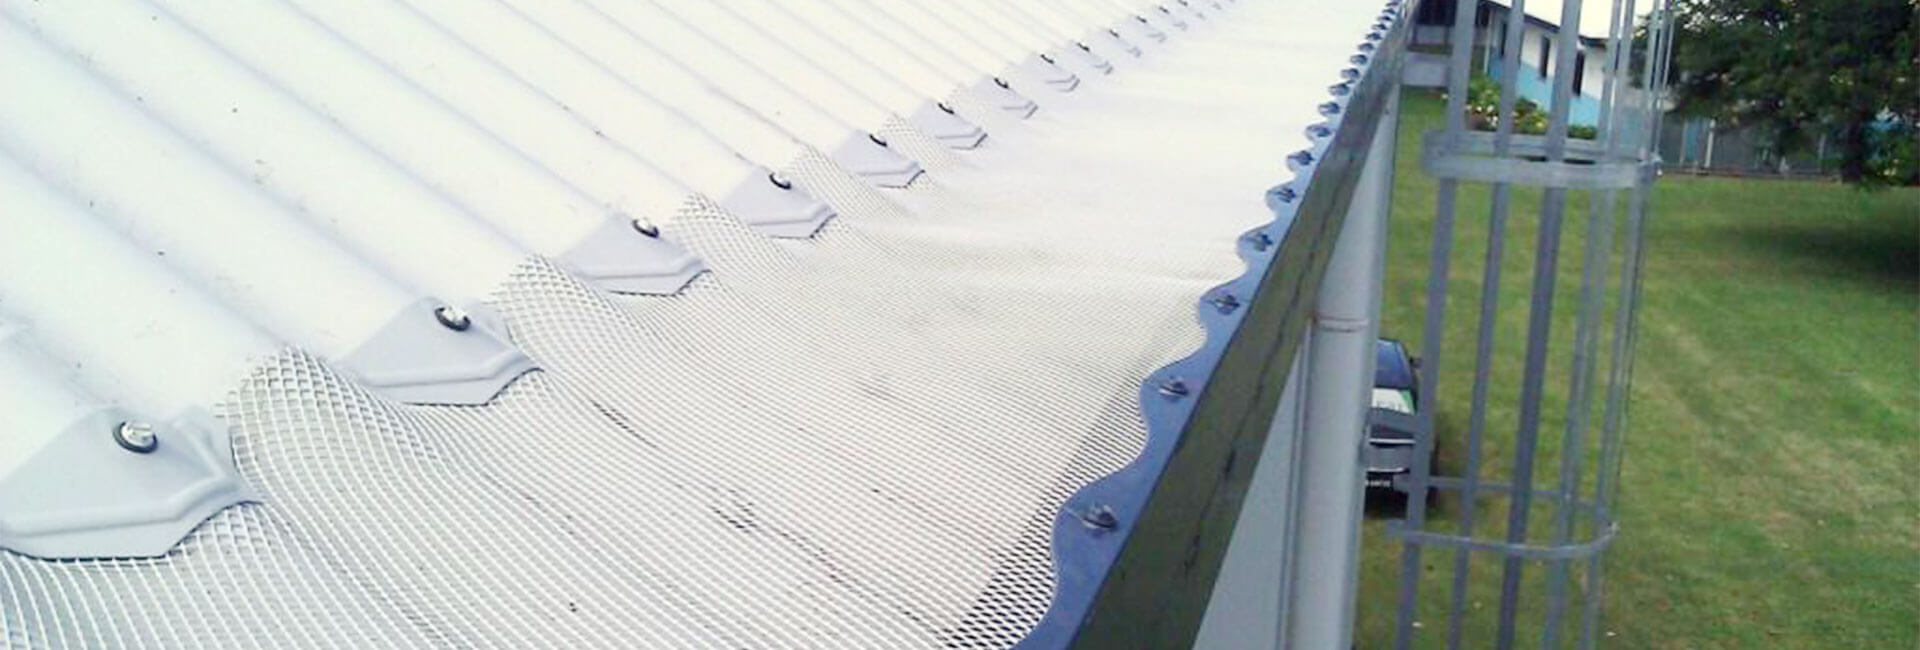 Eliminating Flooding Problems with Gutter Mesh